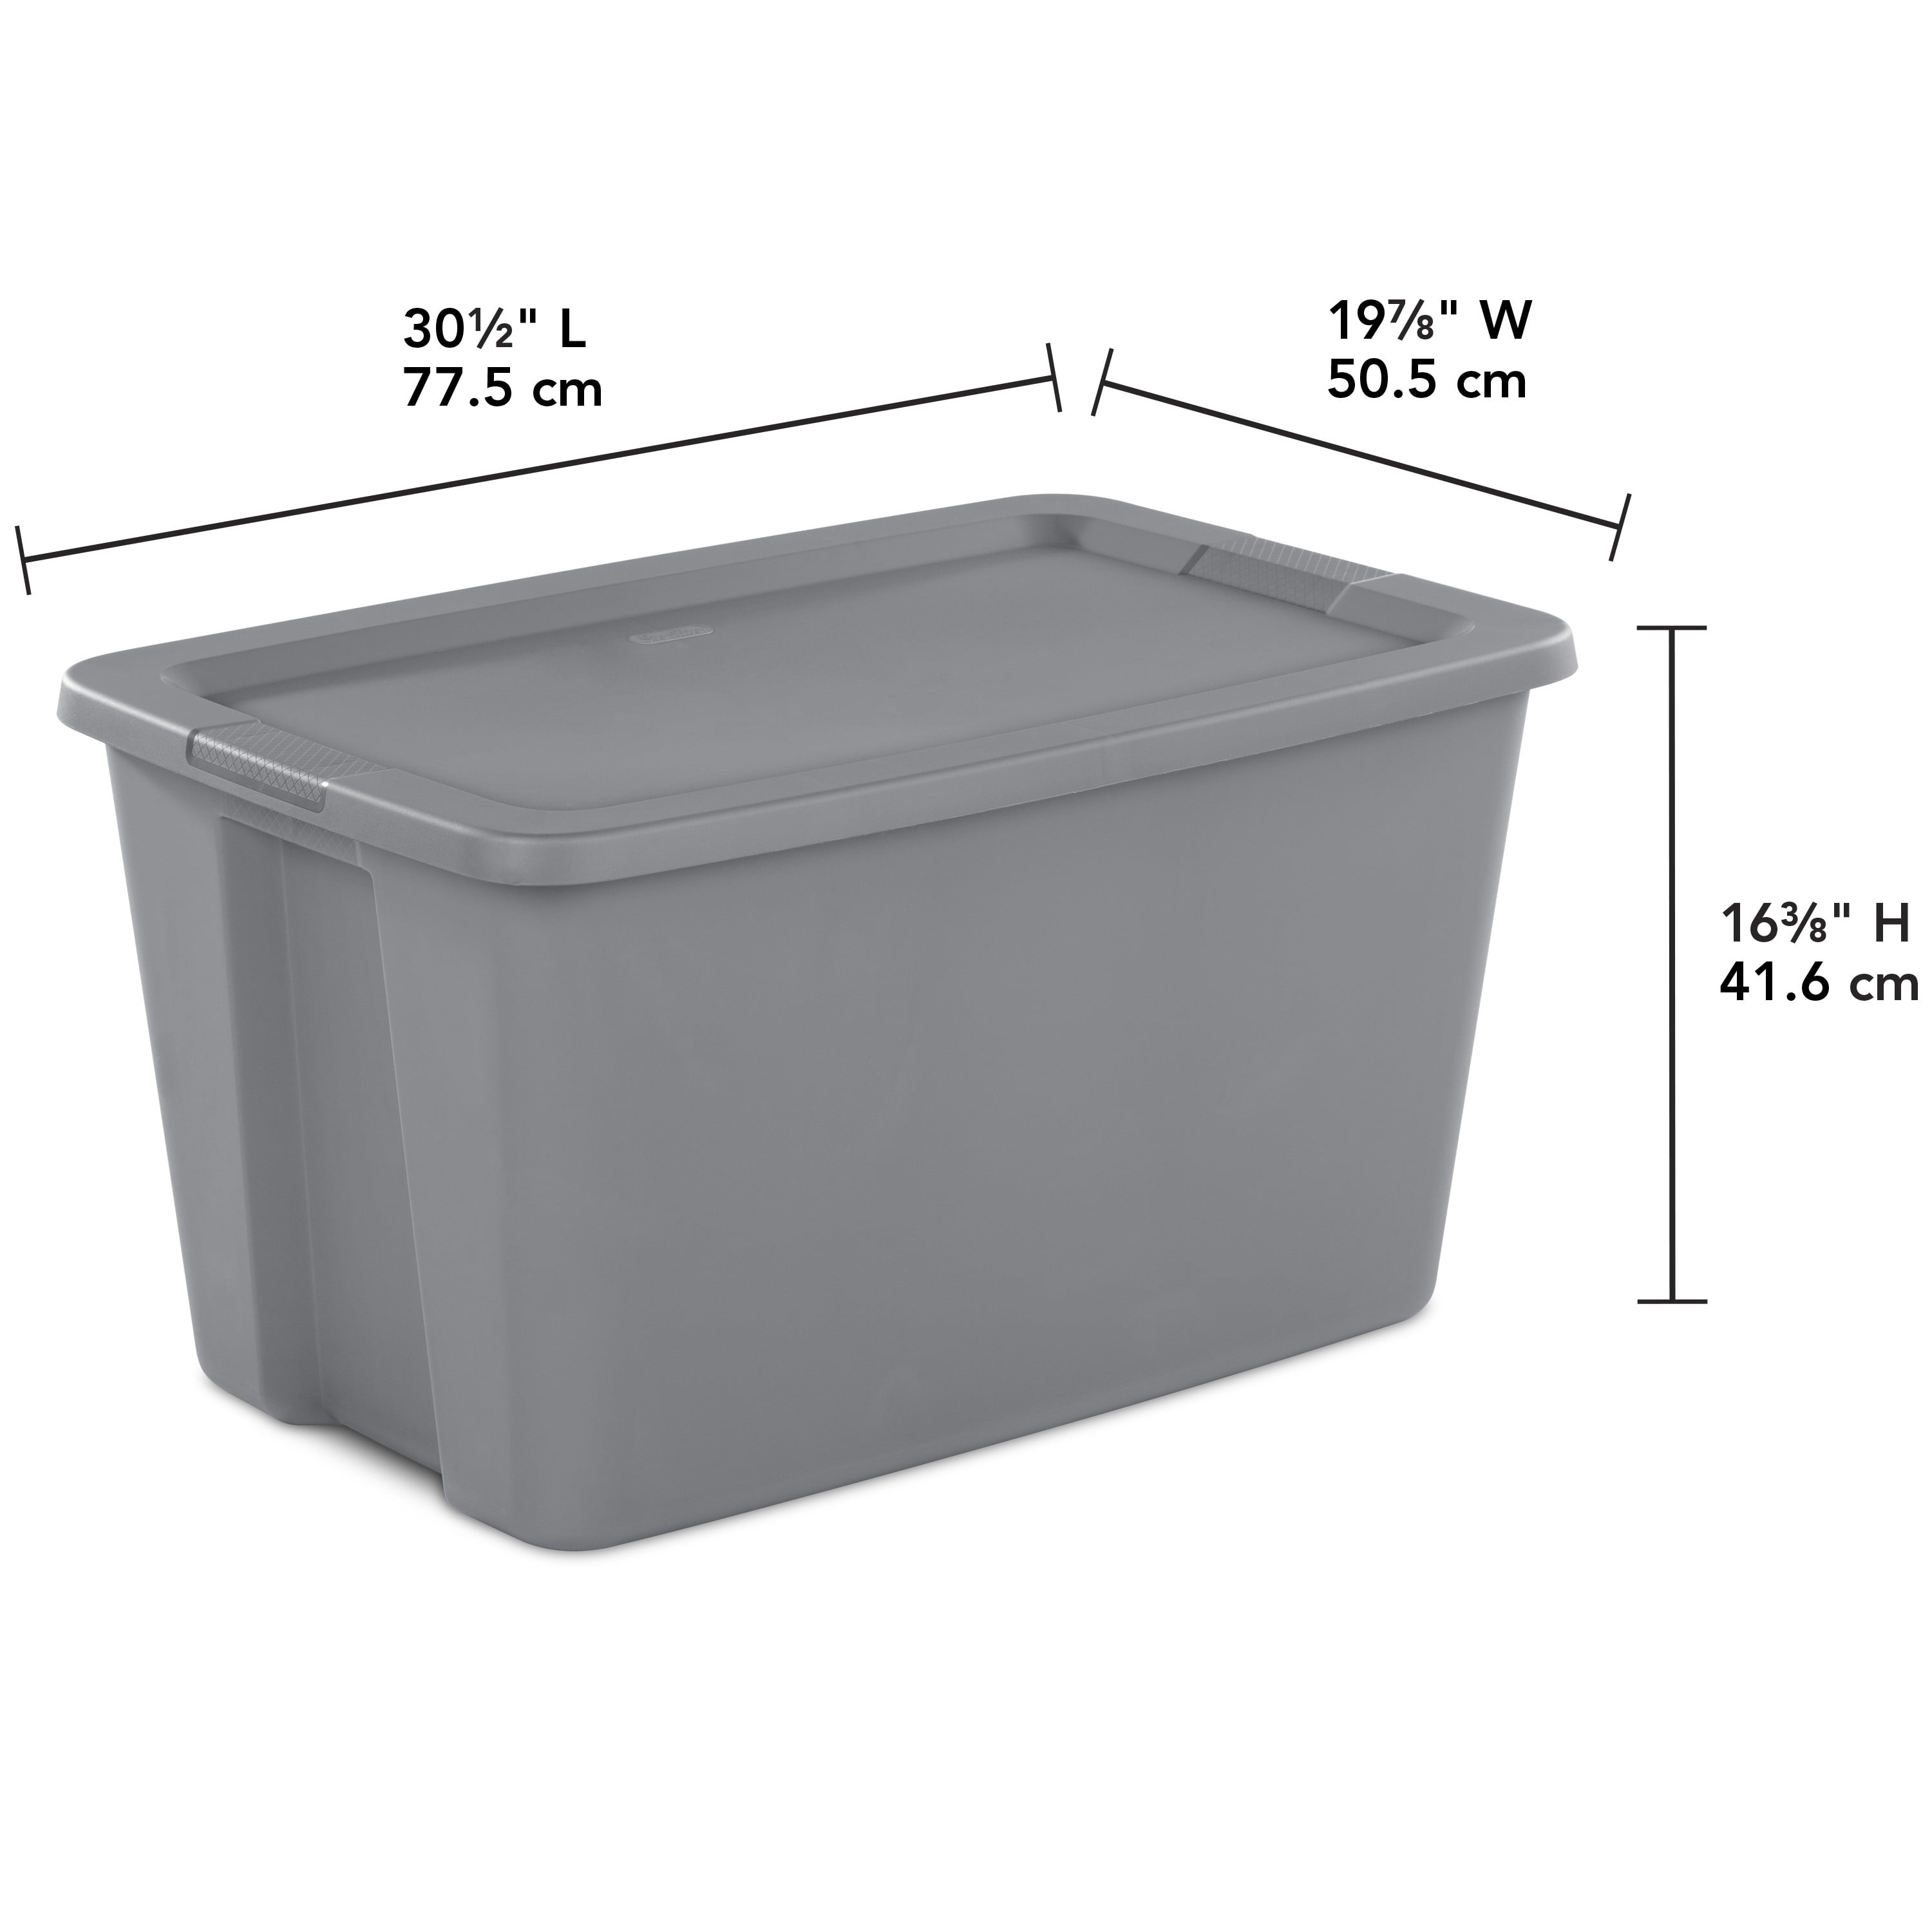 Storage Box With Lid White Materials Paper Assembled Size Length: 35 cm Width: 25 cm Height: 20 cm Bleached Chlorine-Free Paper 